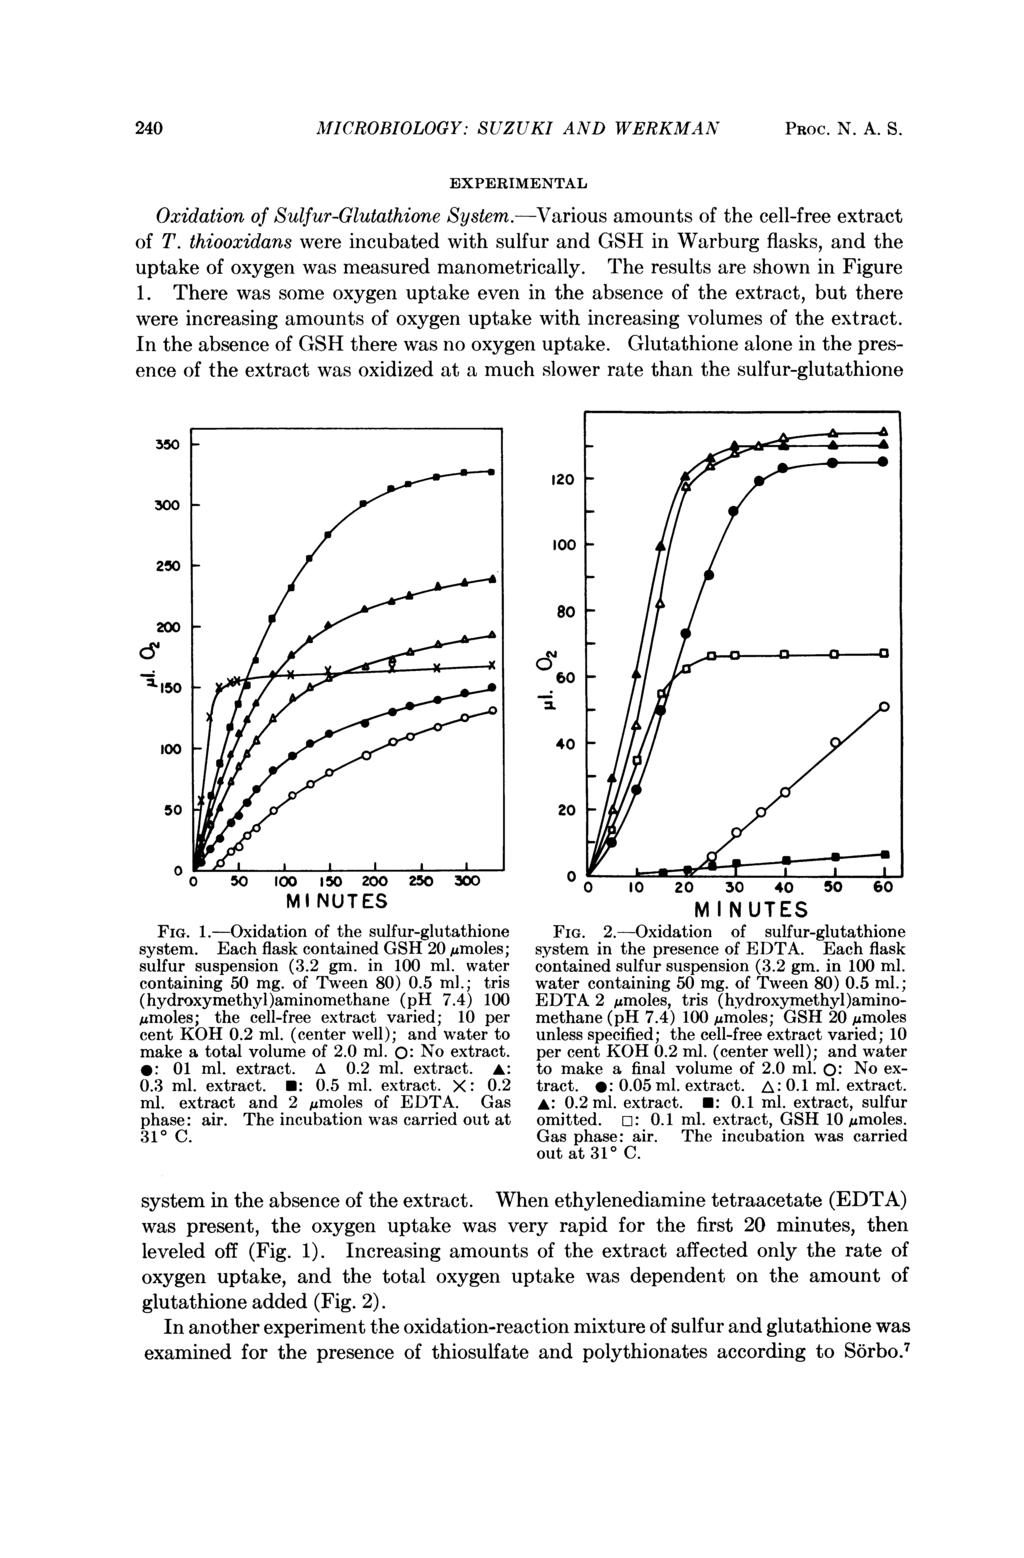 240 MICROBIOLOGY: SUZUKI AND WERKMAN PROC. N. A. S. EXPERIMENTAL Oxidation of Sulfur-Glutathione System.-Various amounts of the cell-free extract of T.